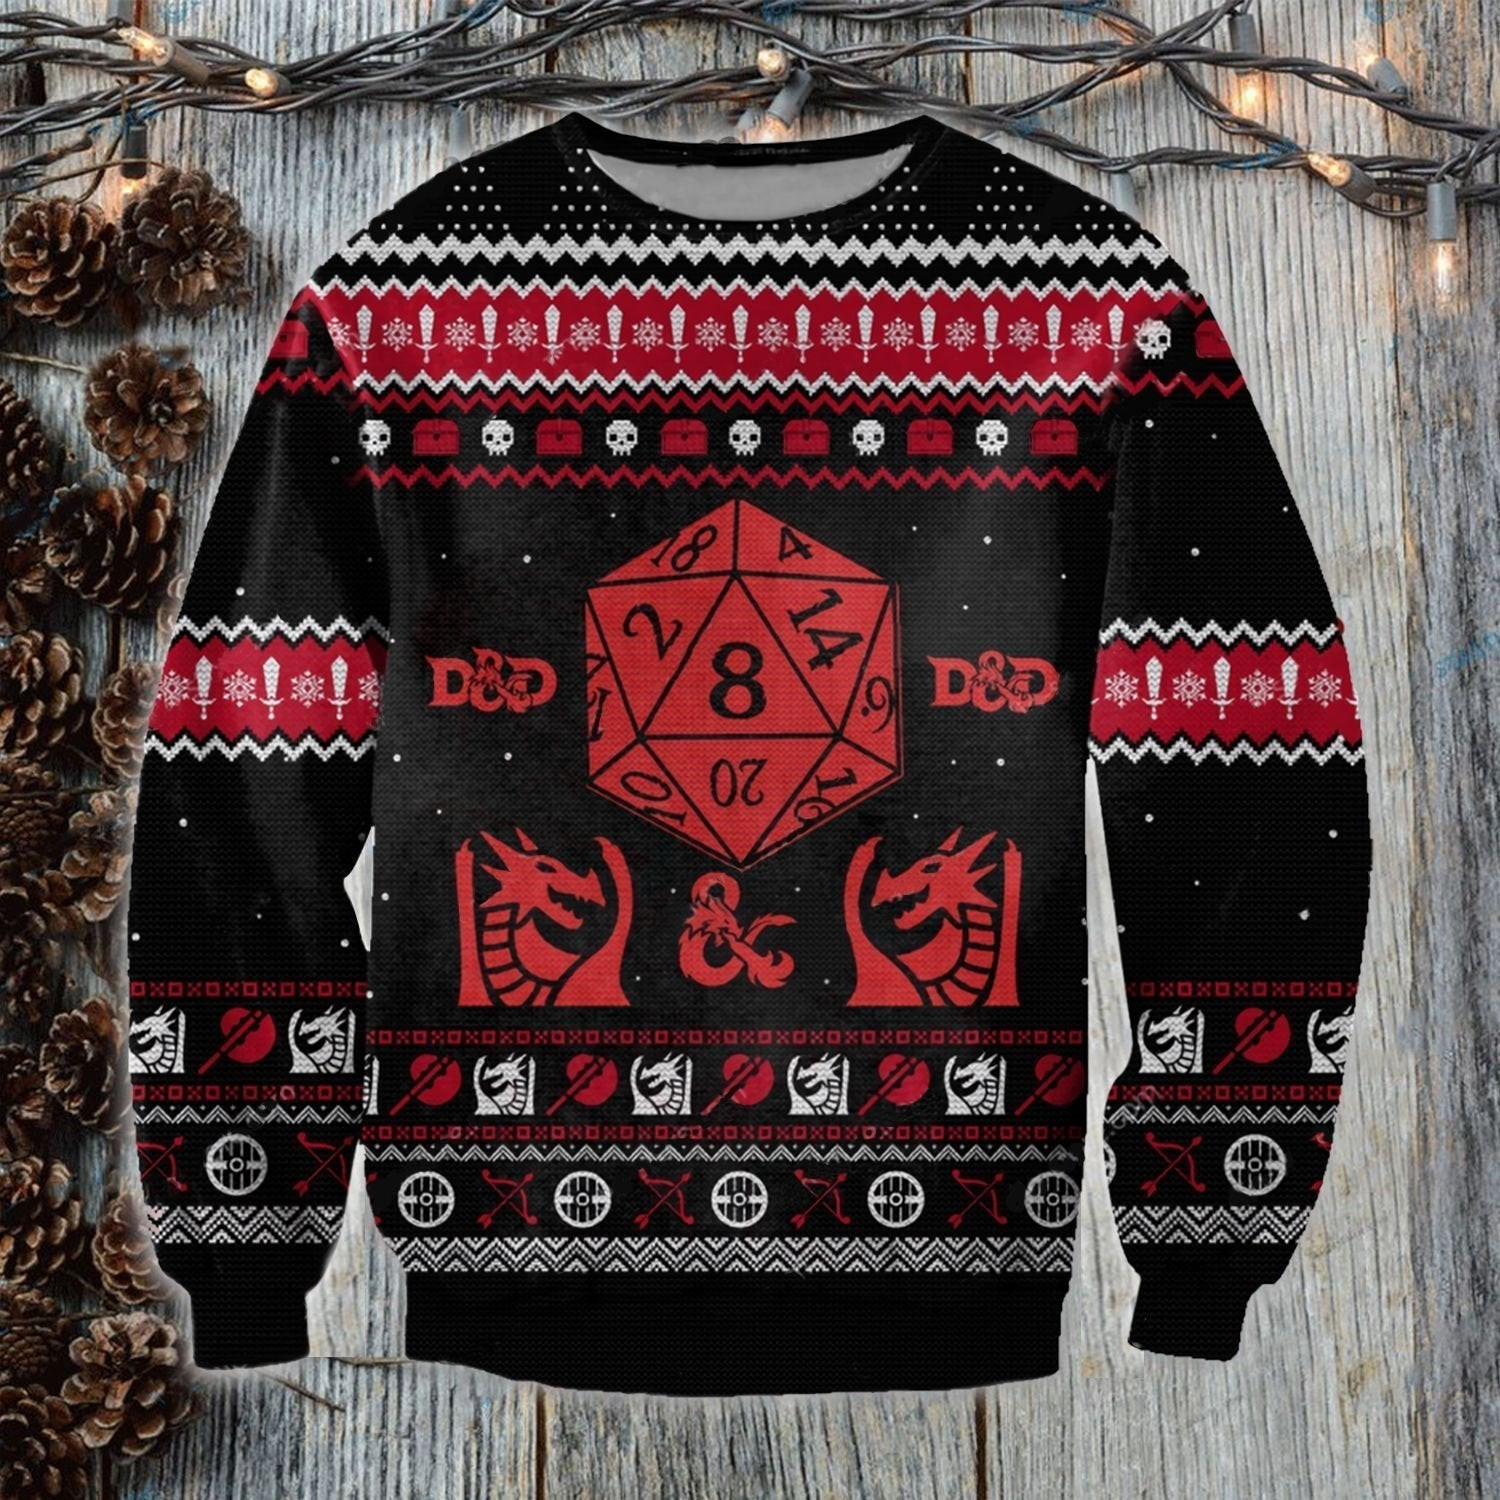 Dragon Ugly Christmas Sweater, Ugly Sweater For Men Women, Holiday Sweater